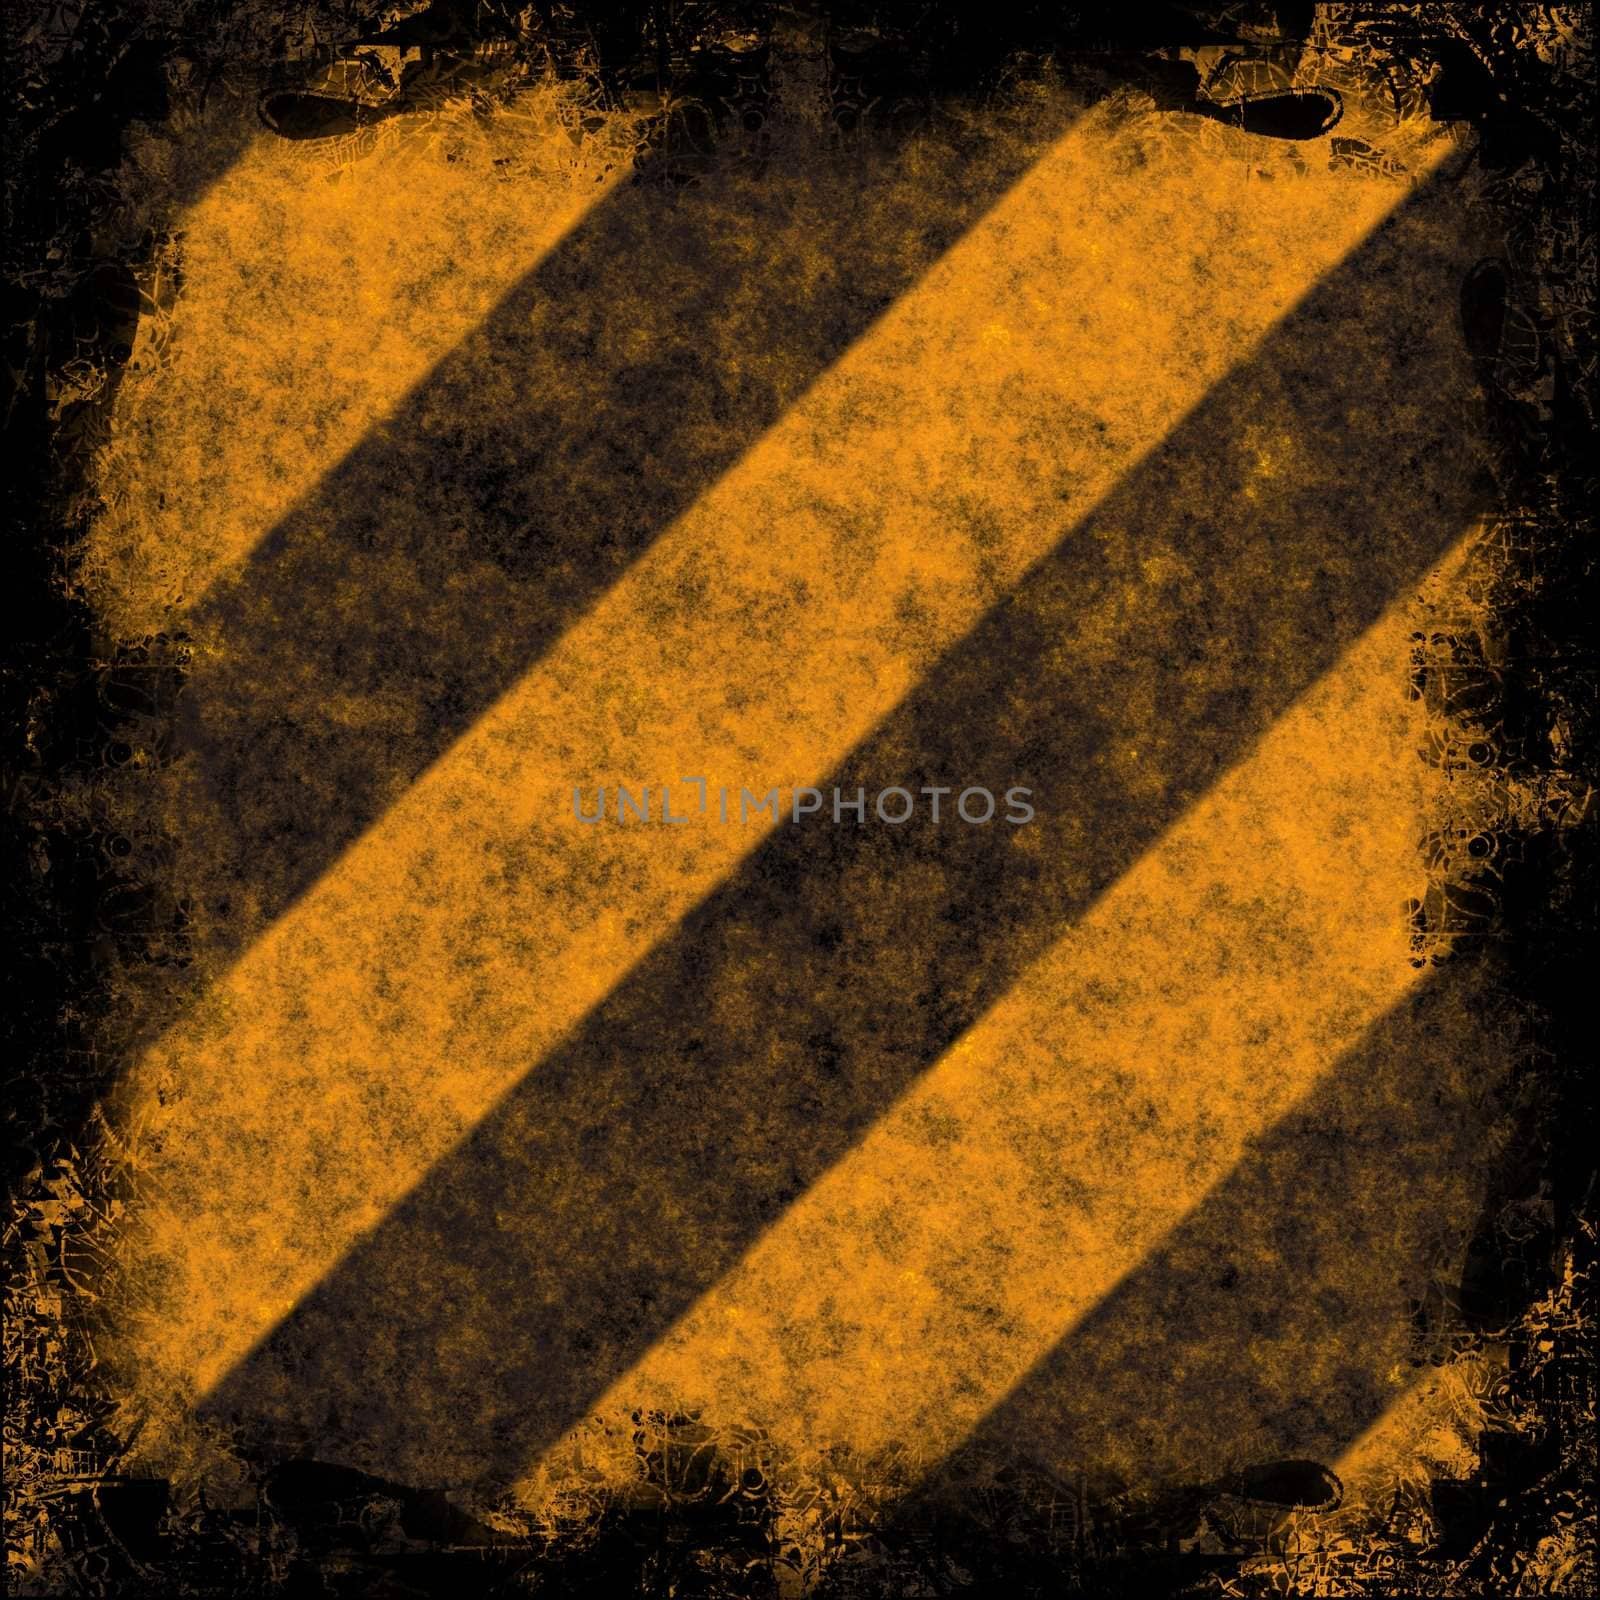 Diagonal hazard stripes texture.  These are weathered, worn and grunge-looking.  